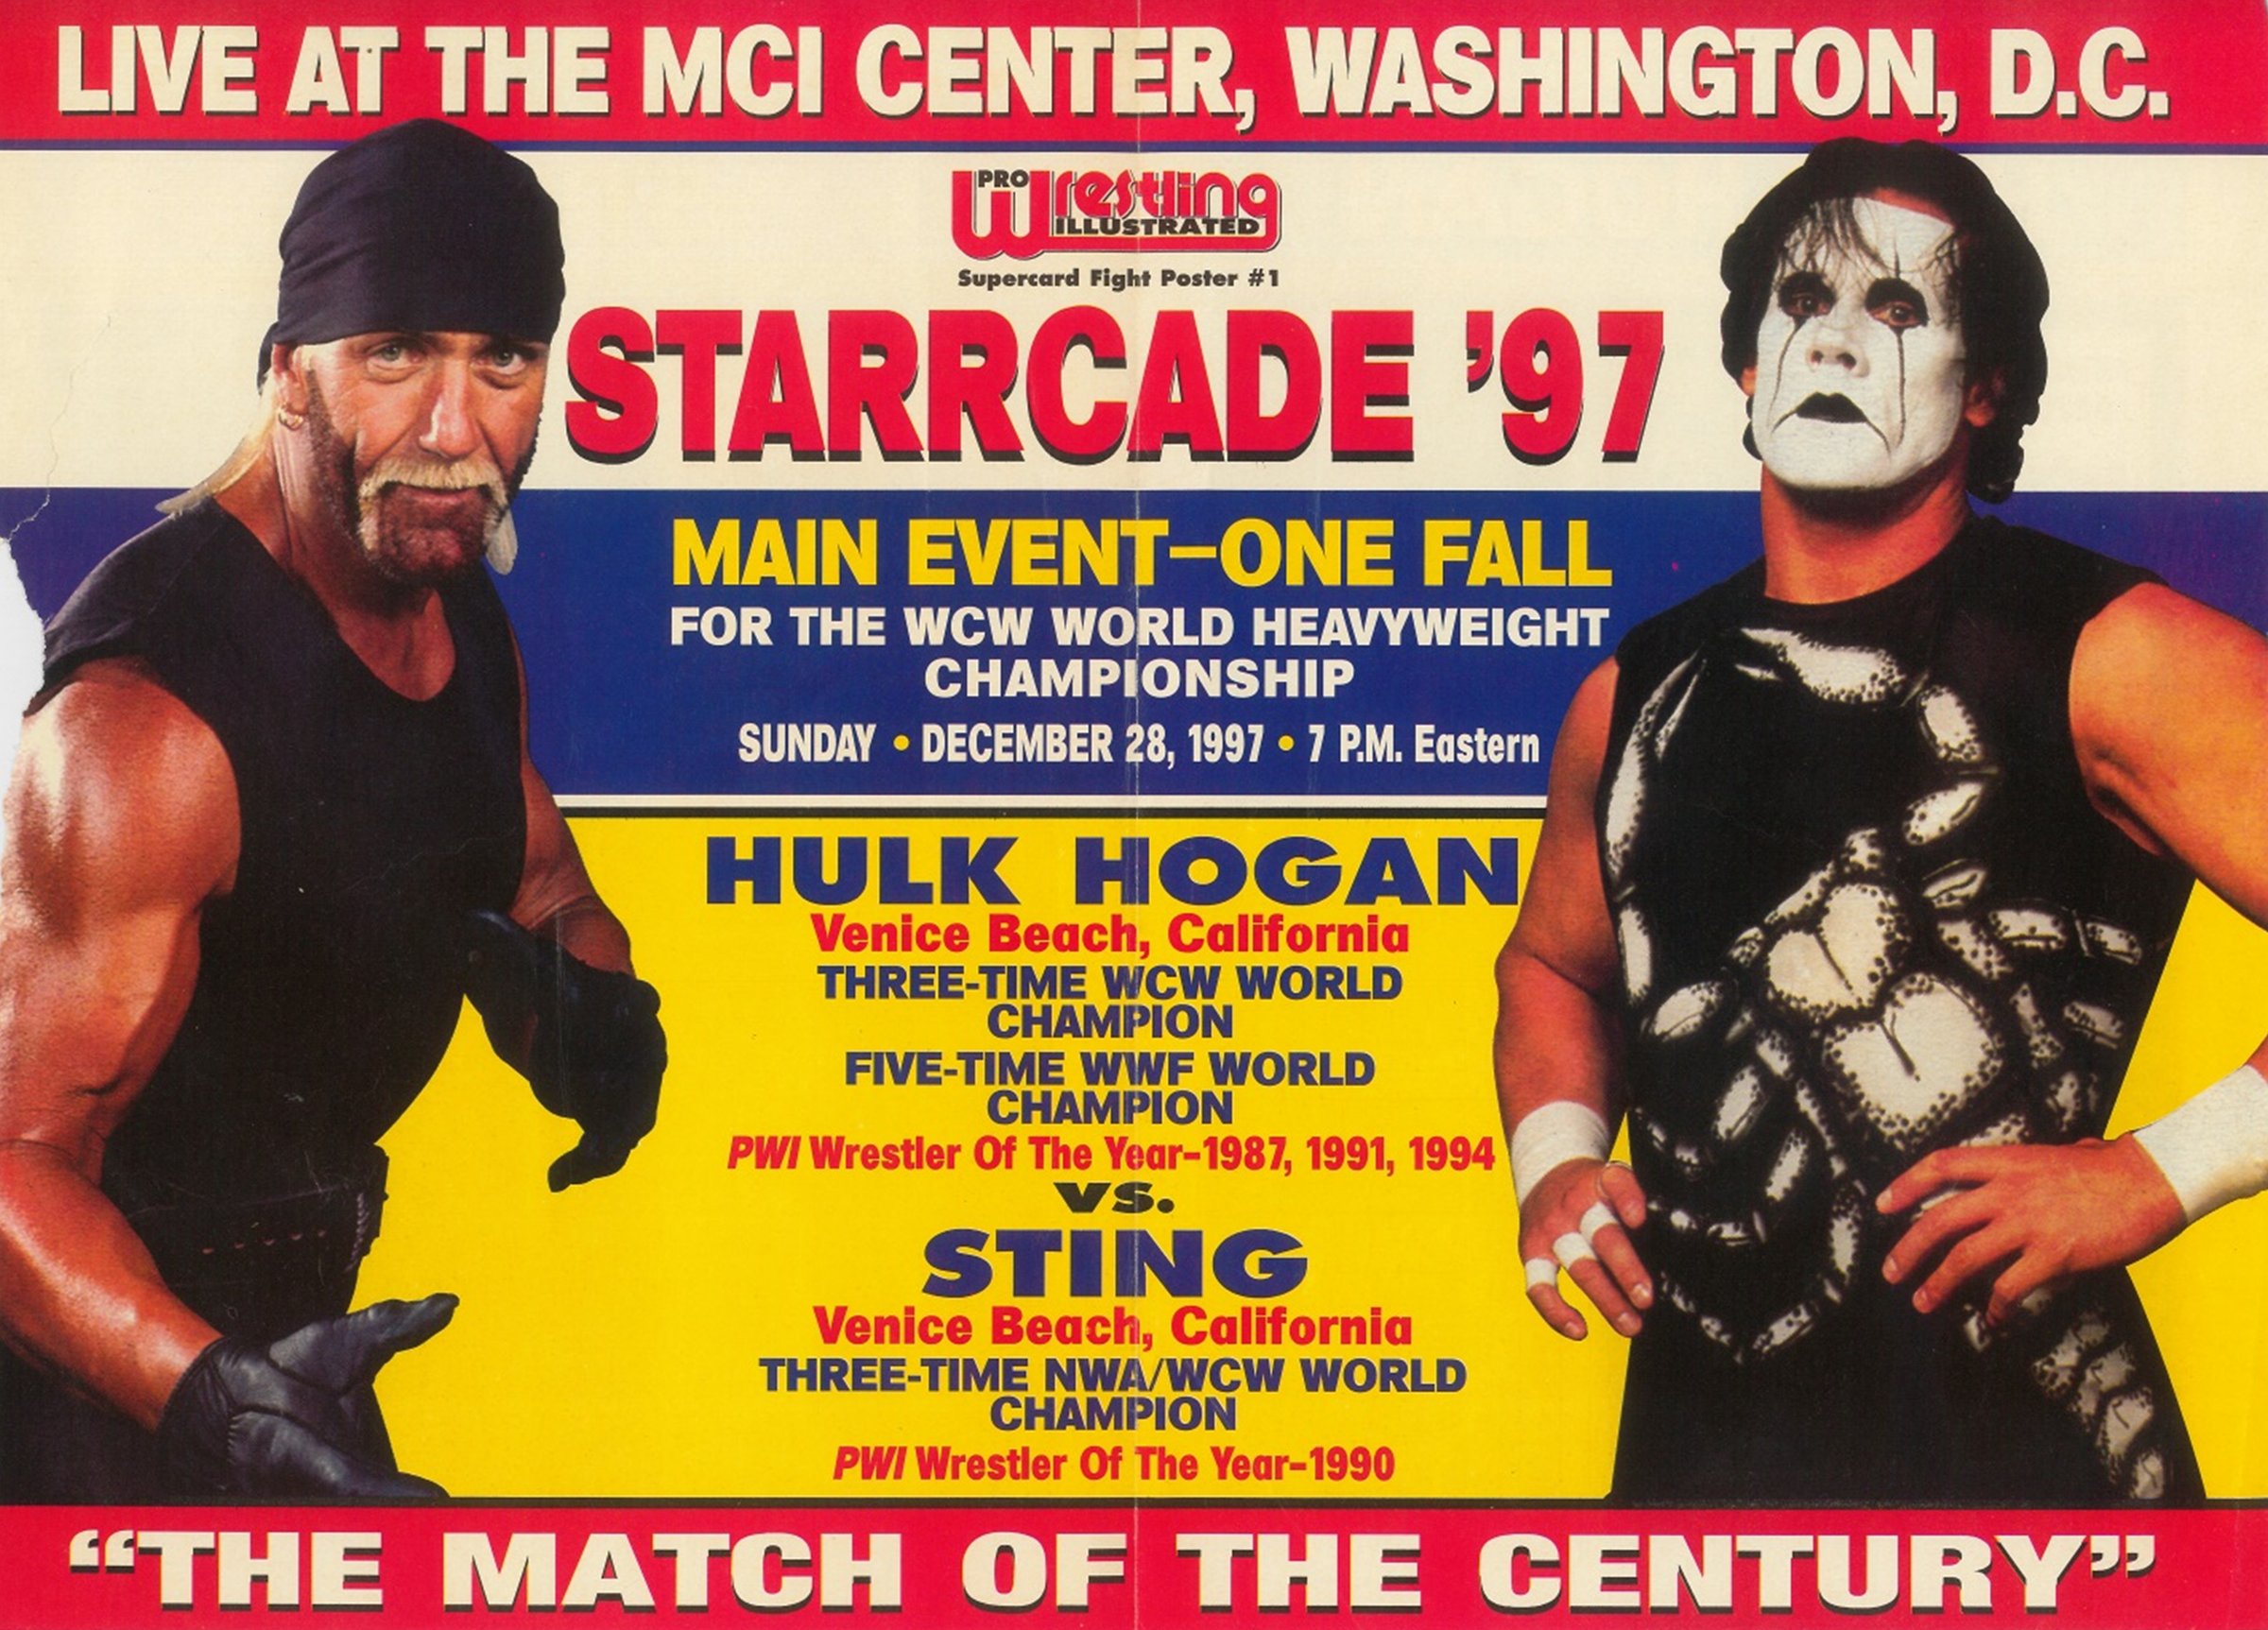 WCW Worldwide on Twitter: "Hulk vs Sting "Match of the Century" Poster - @OfficialPWI [February 1998] A year buildup only for the match to fizzle out due to a weak ending